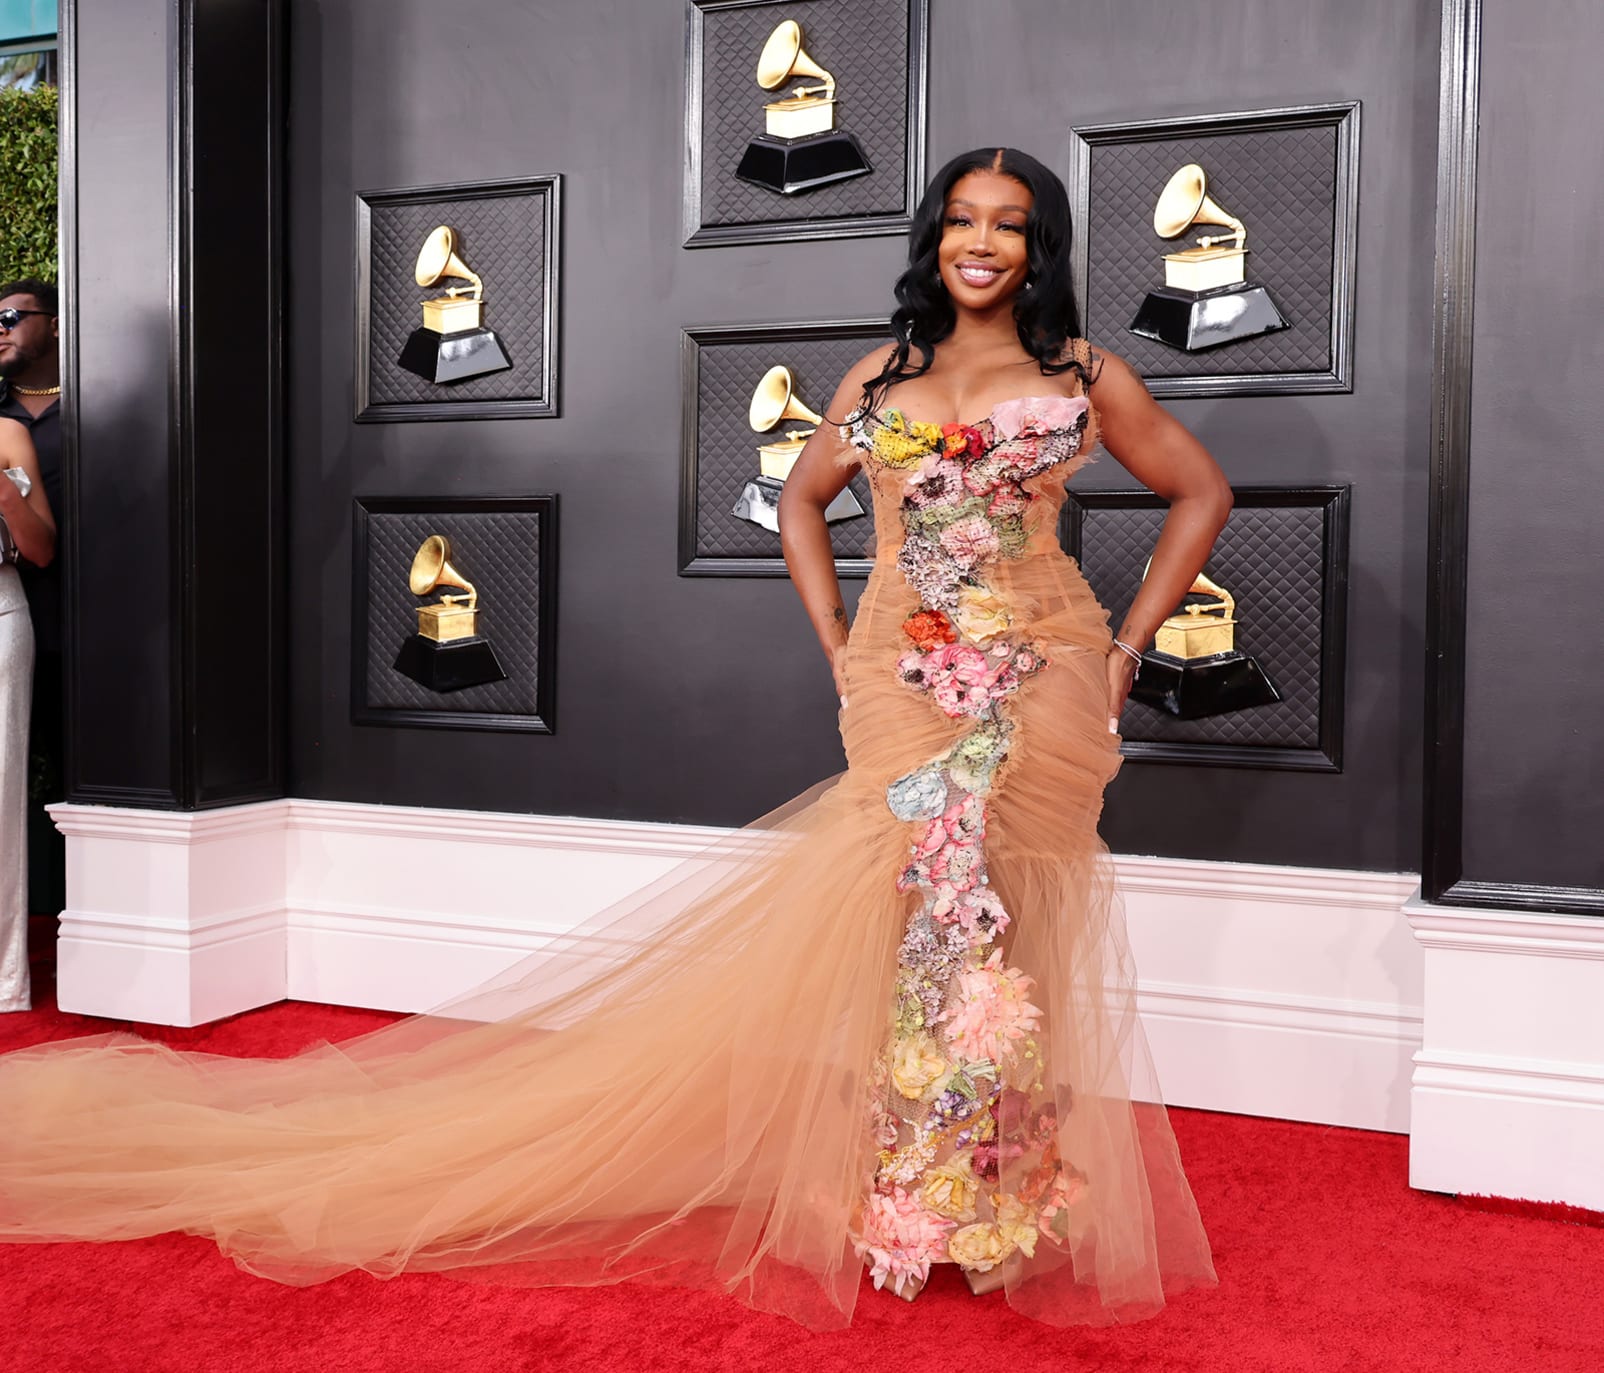 SZA stood out with a sheer, tulle Jean Paul Gaultier gown adorned with fllowers.